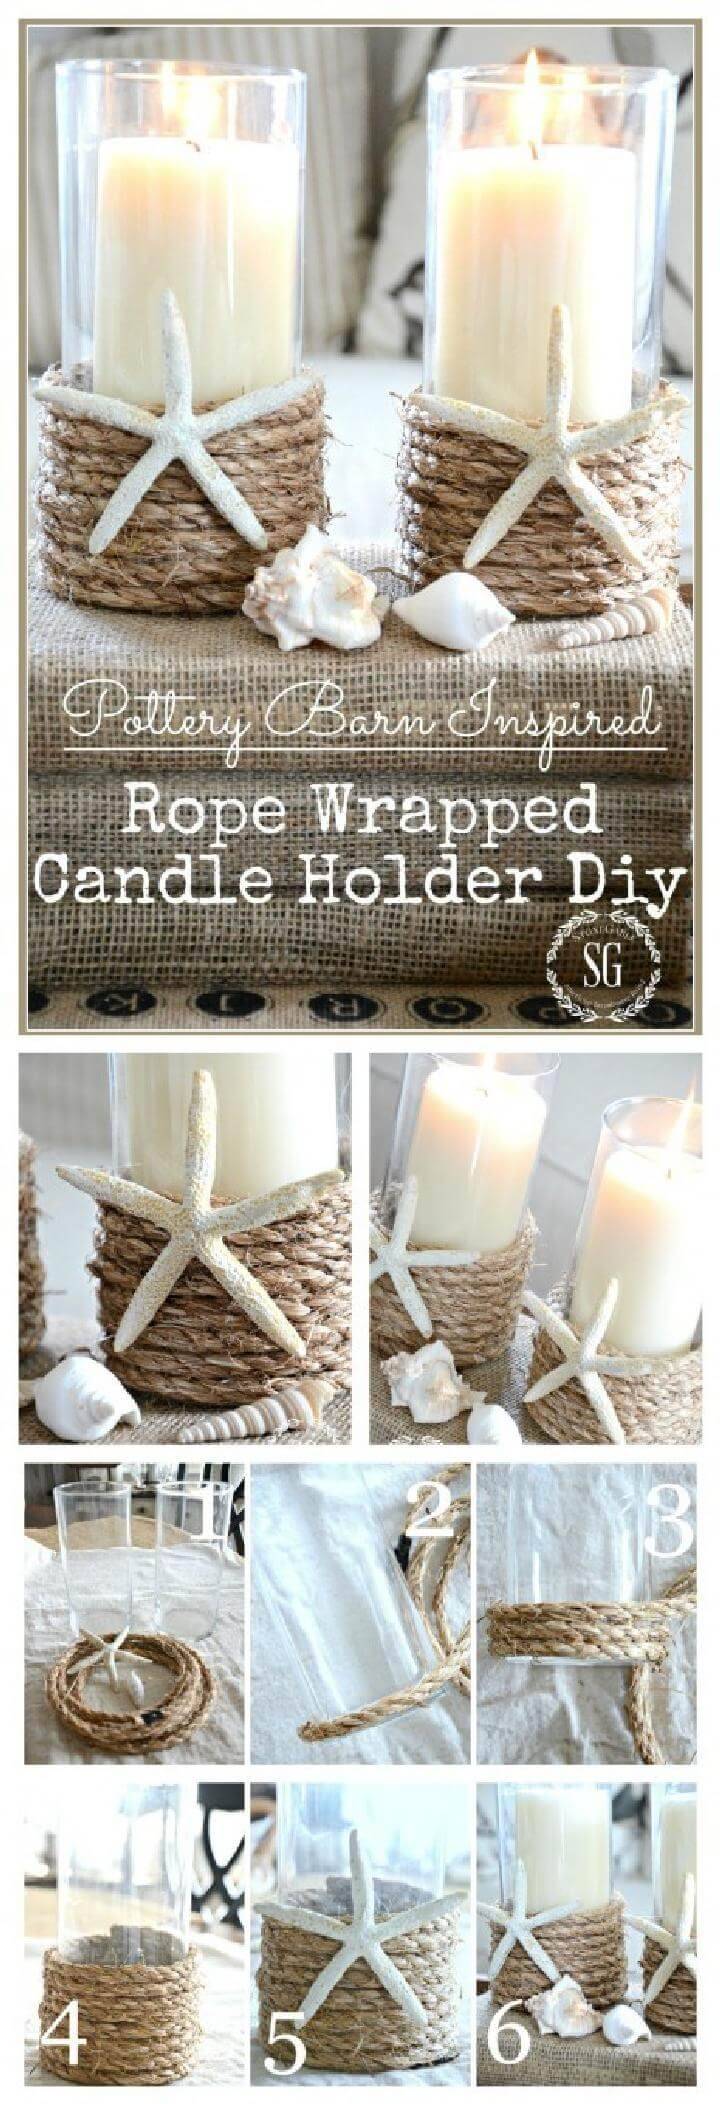 DIY Pottery Barn Inspired Rope Wrapped Candle Holder